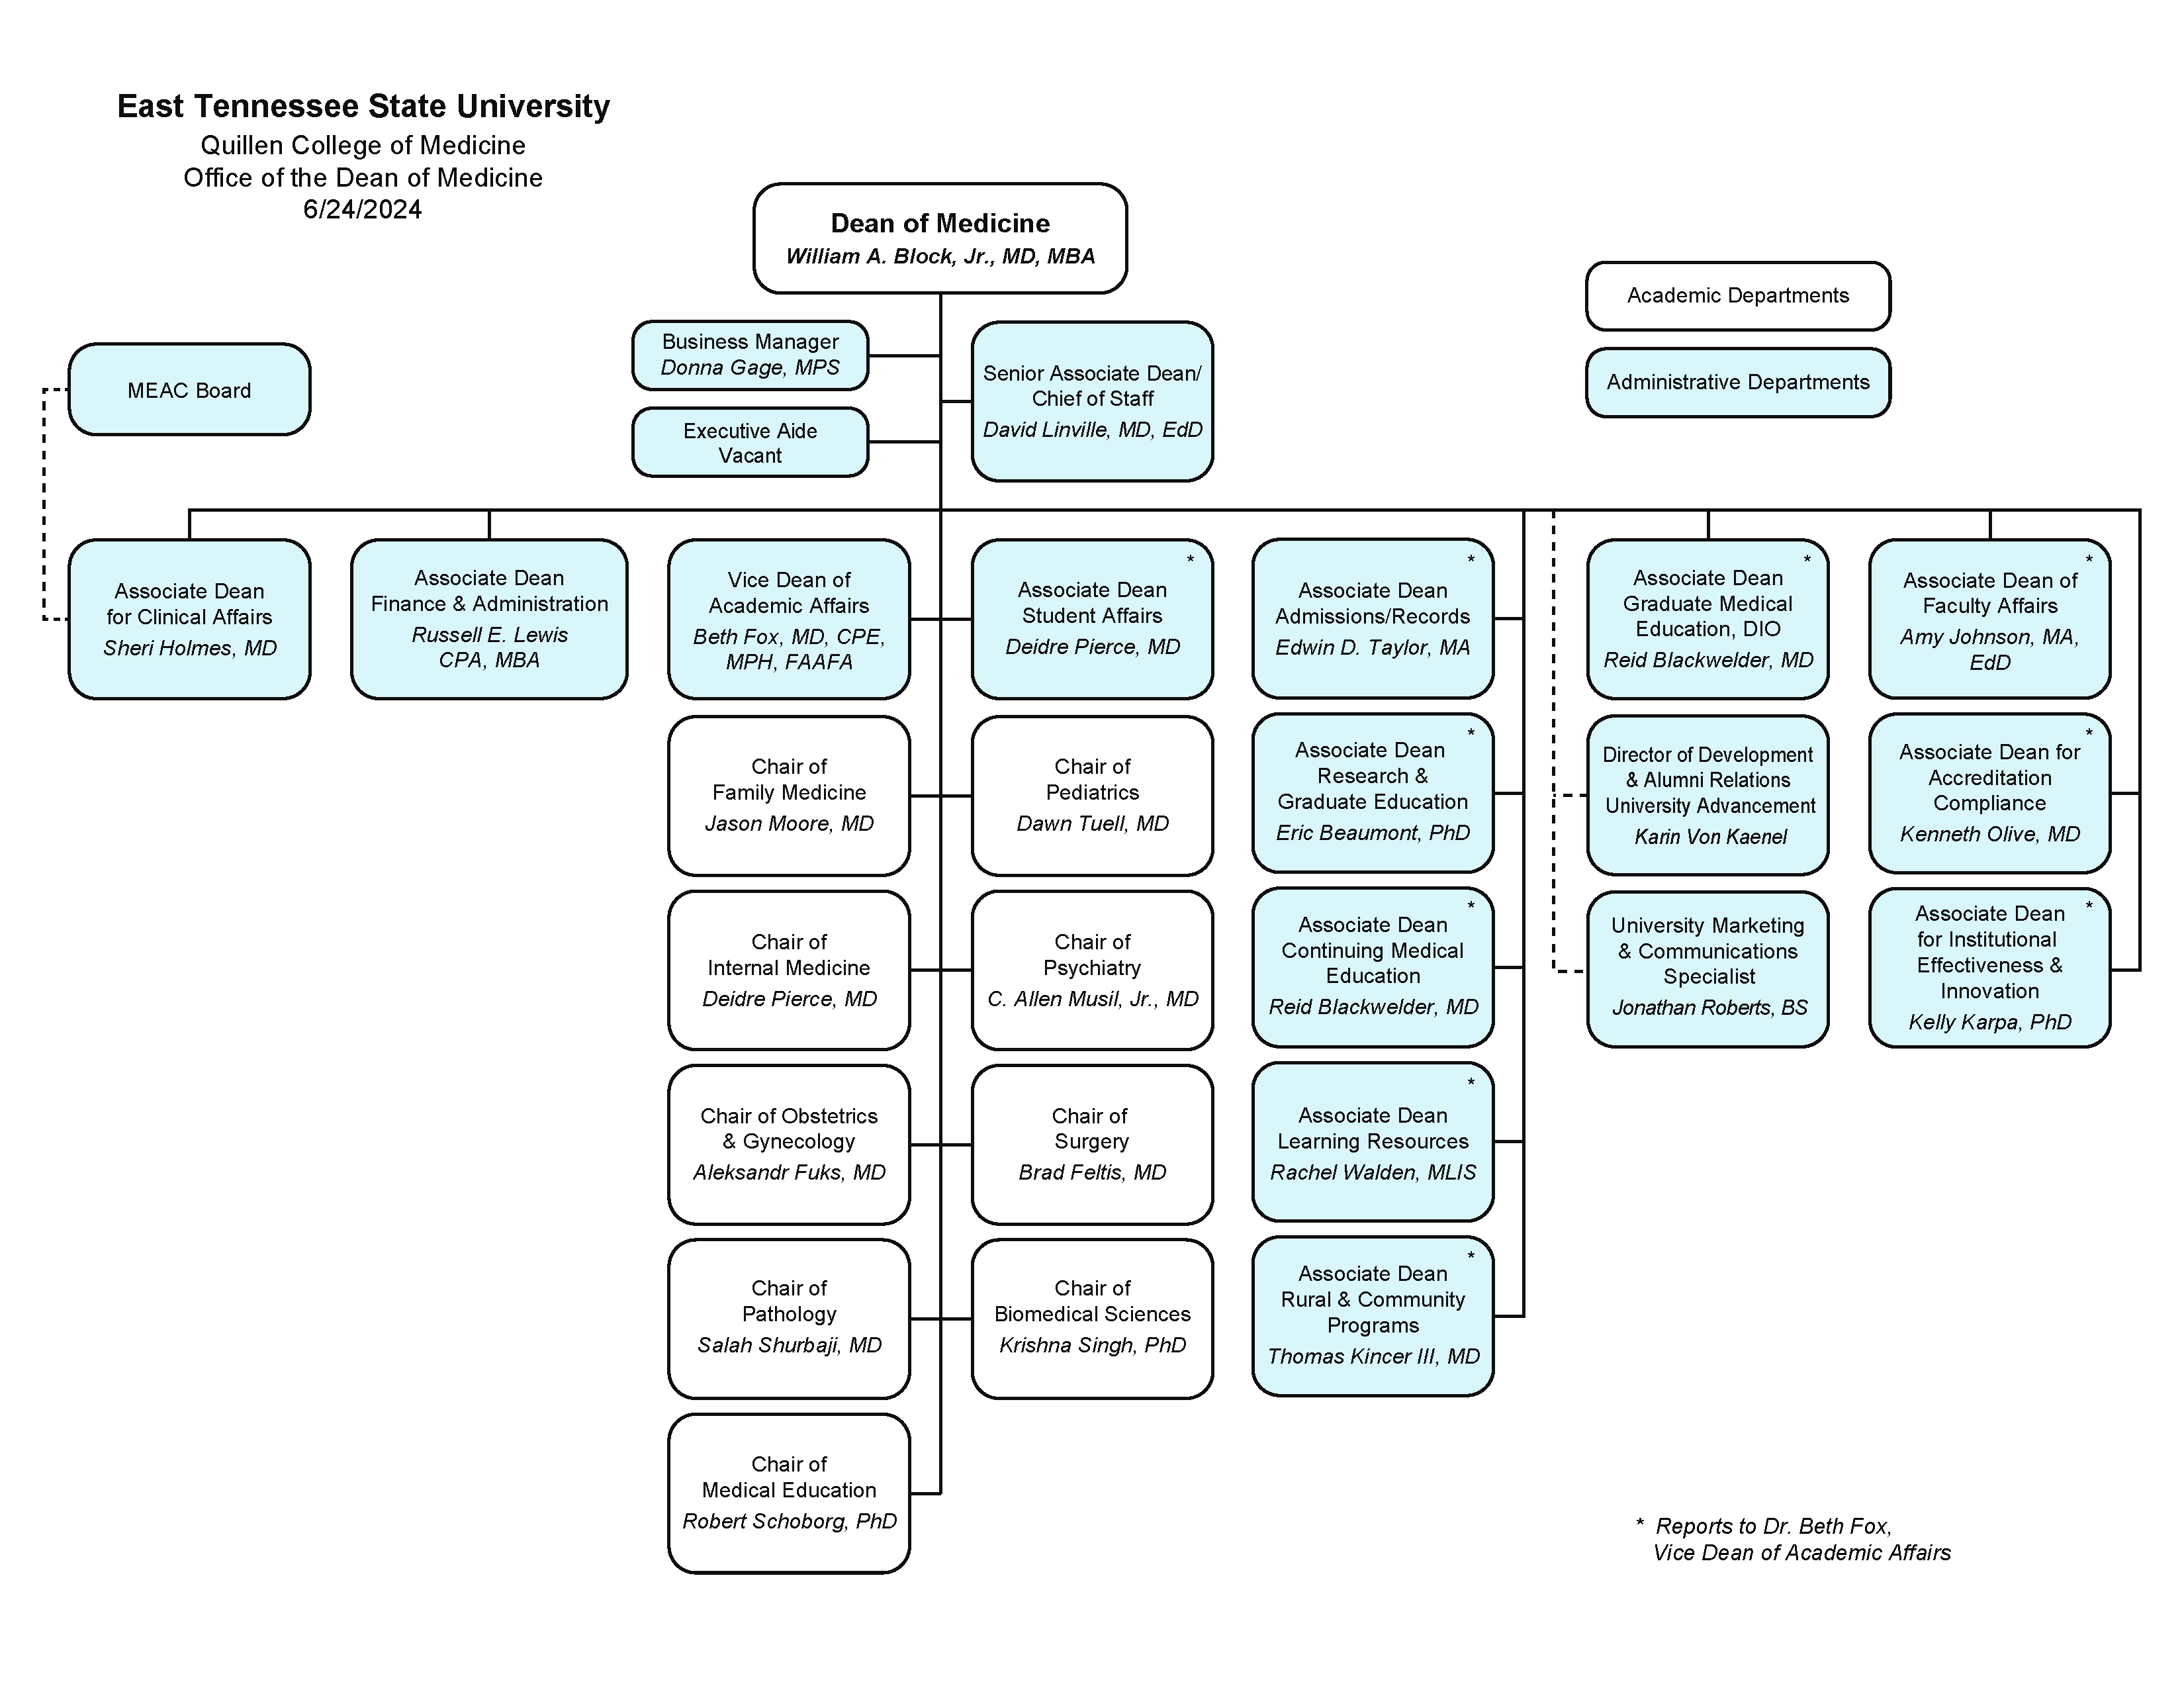 Illustration depicting the following: Organizational Chart for the Office of the Dean of Medicine, Quillen College of Medicine, East Tennessee State University, 6/24/2024 Dean of Medicine, William A. Block, Jr., MD, MBA • Three staff members report to Dean of Medicine 1. David Linville, MD, EdD, Senior Associate Dean/Chief of Staff 2. Donna Gage, MPS, Business Manager 3. Vacant, Executive Aide • One college administrator reports to Dean of Medicine and MEAC Board (Medical Education Assistance Corporation) 1. Sheri Holmes, MD, Associate Dean for Clinical Affairs • Two college administrators report only to Dean of Medicine 1. Russell E. Lewis, CPA, MBA, Associate Dean, Finance & Administration 2. Beth Fox, MD, CPE, MPH, FAAFA, Vice Dean of Academic Affairs • Ten college administrators report to both the Dean of Medicine and the Vice Dean of Academic Affairs 1. Deidre Pierce, MD, Associate Dean, Student Affairs 2. Edwin D. Taylor, MA, Associate Dean, Admissions/Records 3. Eric Beaumont, PhD, Associate Dean, Research & Graduate Education 4. Reid Blackwelder, MD, Associate Dean, Continuing Medical Education 5. Rachel Walden, MLIS, Associate Dean, Learning Resources 6. Thomas Kincer III, MD, Associate Dean, Rural & Community Programs 7. Reid Blackwelder, MD, Associate Dean, Graduate Medical Education, DIO 8. Amy Johnson, MA, EdD, Associate Dean of Faculty Affairs 9. Kenneth Olive, MD, Associate Dean for Accreditation Compliance 10.Kelly Karpa, PhD, Associate Dean for Institutional Effectiveness & Innovation • Nine department chairs report to the Dean of Medicine 1. Jason Moore, MD, Chair of Family Medicine 2. Deidre Pierce, MD, Chair of Internal Medicine 3. Aleksandr Fuks, MD, Chair of Obstetrics & Gynecology 4. Salah Shurbaji, MD, Chair of Pathology 5. Robert Schoborg, PhD , Chair of Medical Education 6. Dawn Tuell, MD , Chair of Pediatrics 7. C. Allen Musil, Jr., MD, Chair of Psychiatry 8. Brad Feltis, MD, Chair of Surgery 9. Krishna Singh, PhD, Chair of Biomedical Sciences • Two professional positions report to Dean of Medicine 1. Karin Von Kaenel, Director of Development & Alumni Relations, University Advancement 2. Jonathan Roberts, BS, University Marketing & Communications Specialist 